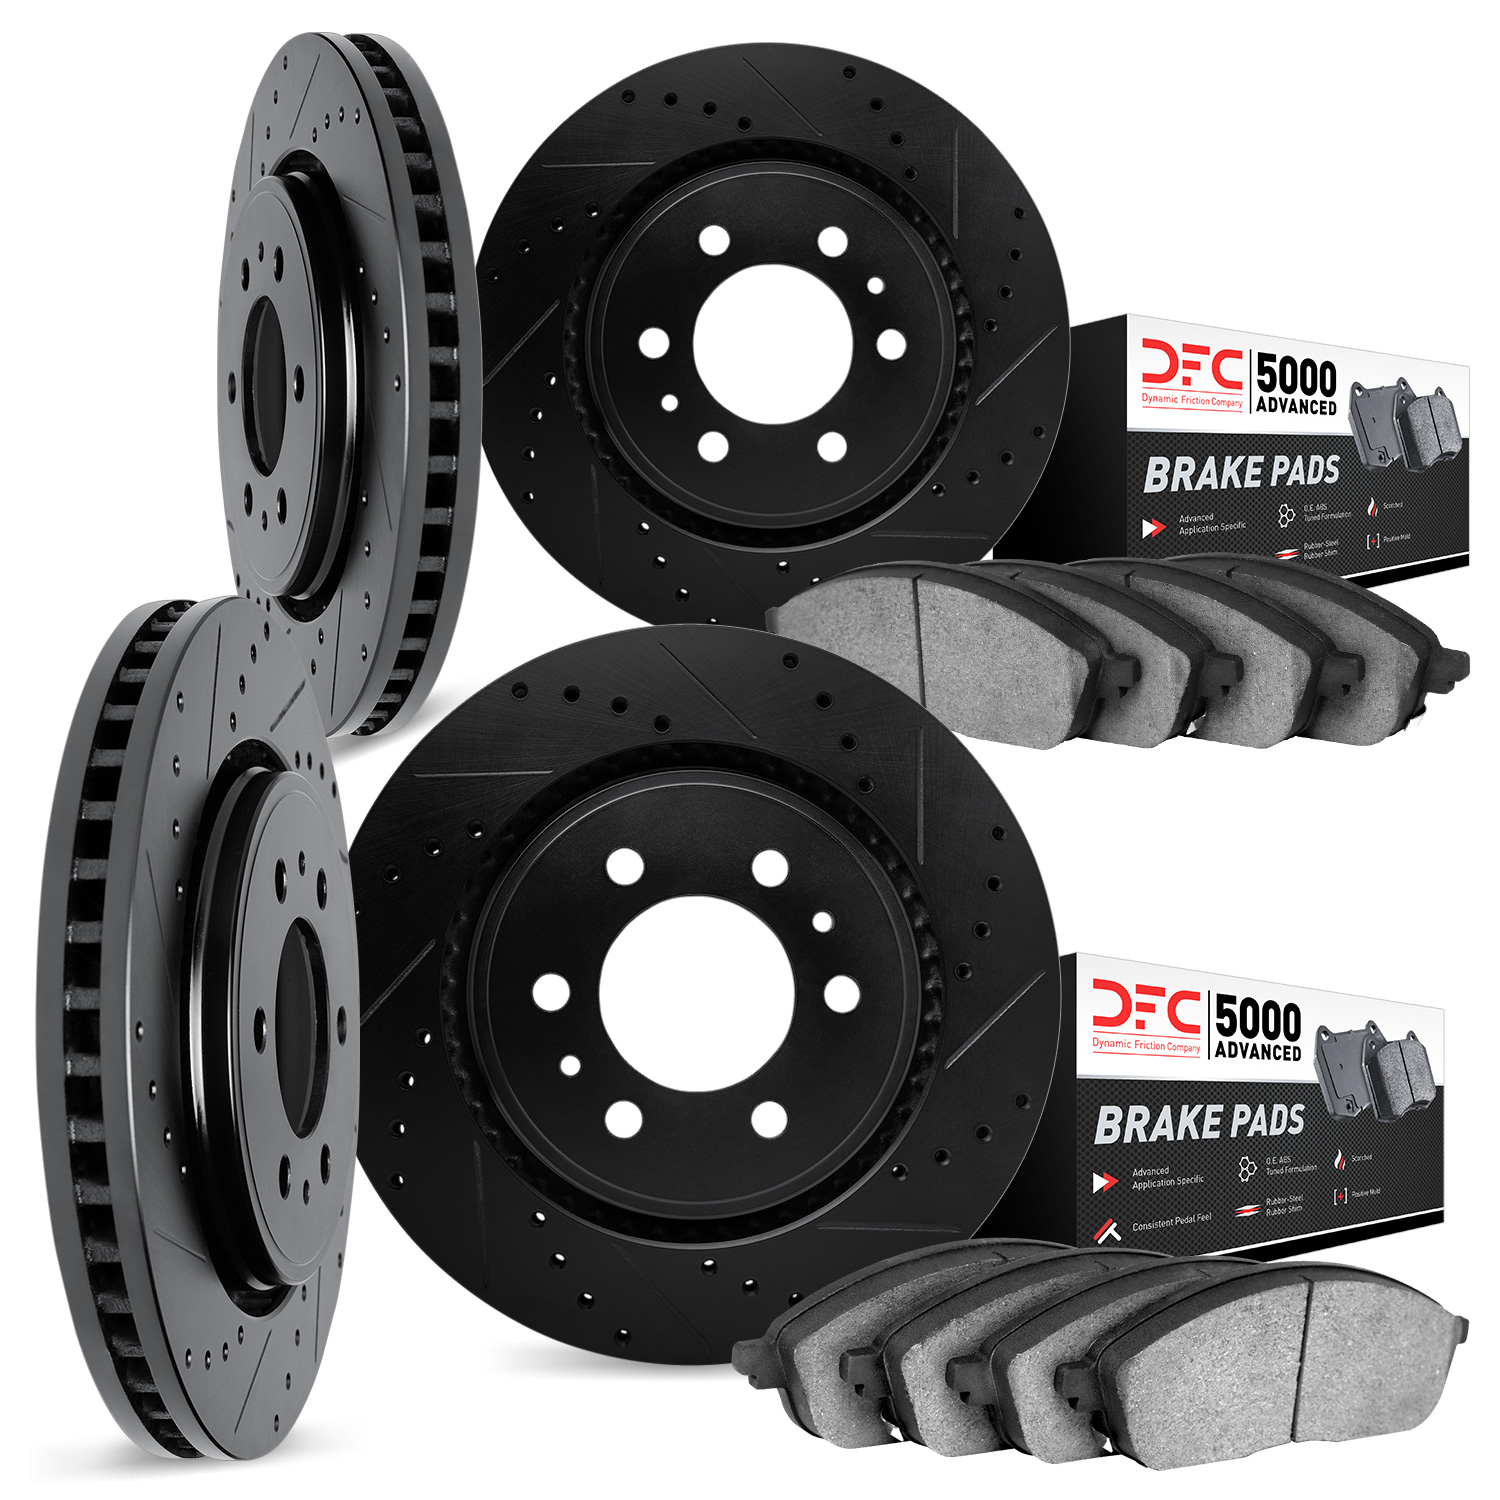 8504-67108 Drilled/Slotted Brake Rotors w/5000 Advanced Brake Pads Kit [Black], 1988-1995 Infiniti/Nissan, Position: Front and R